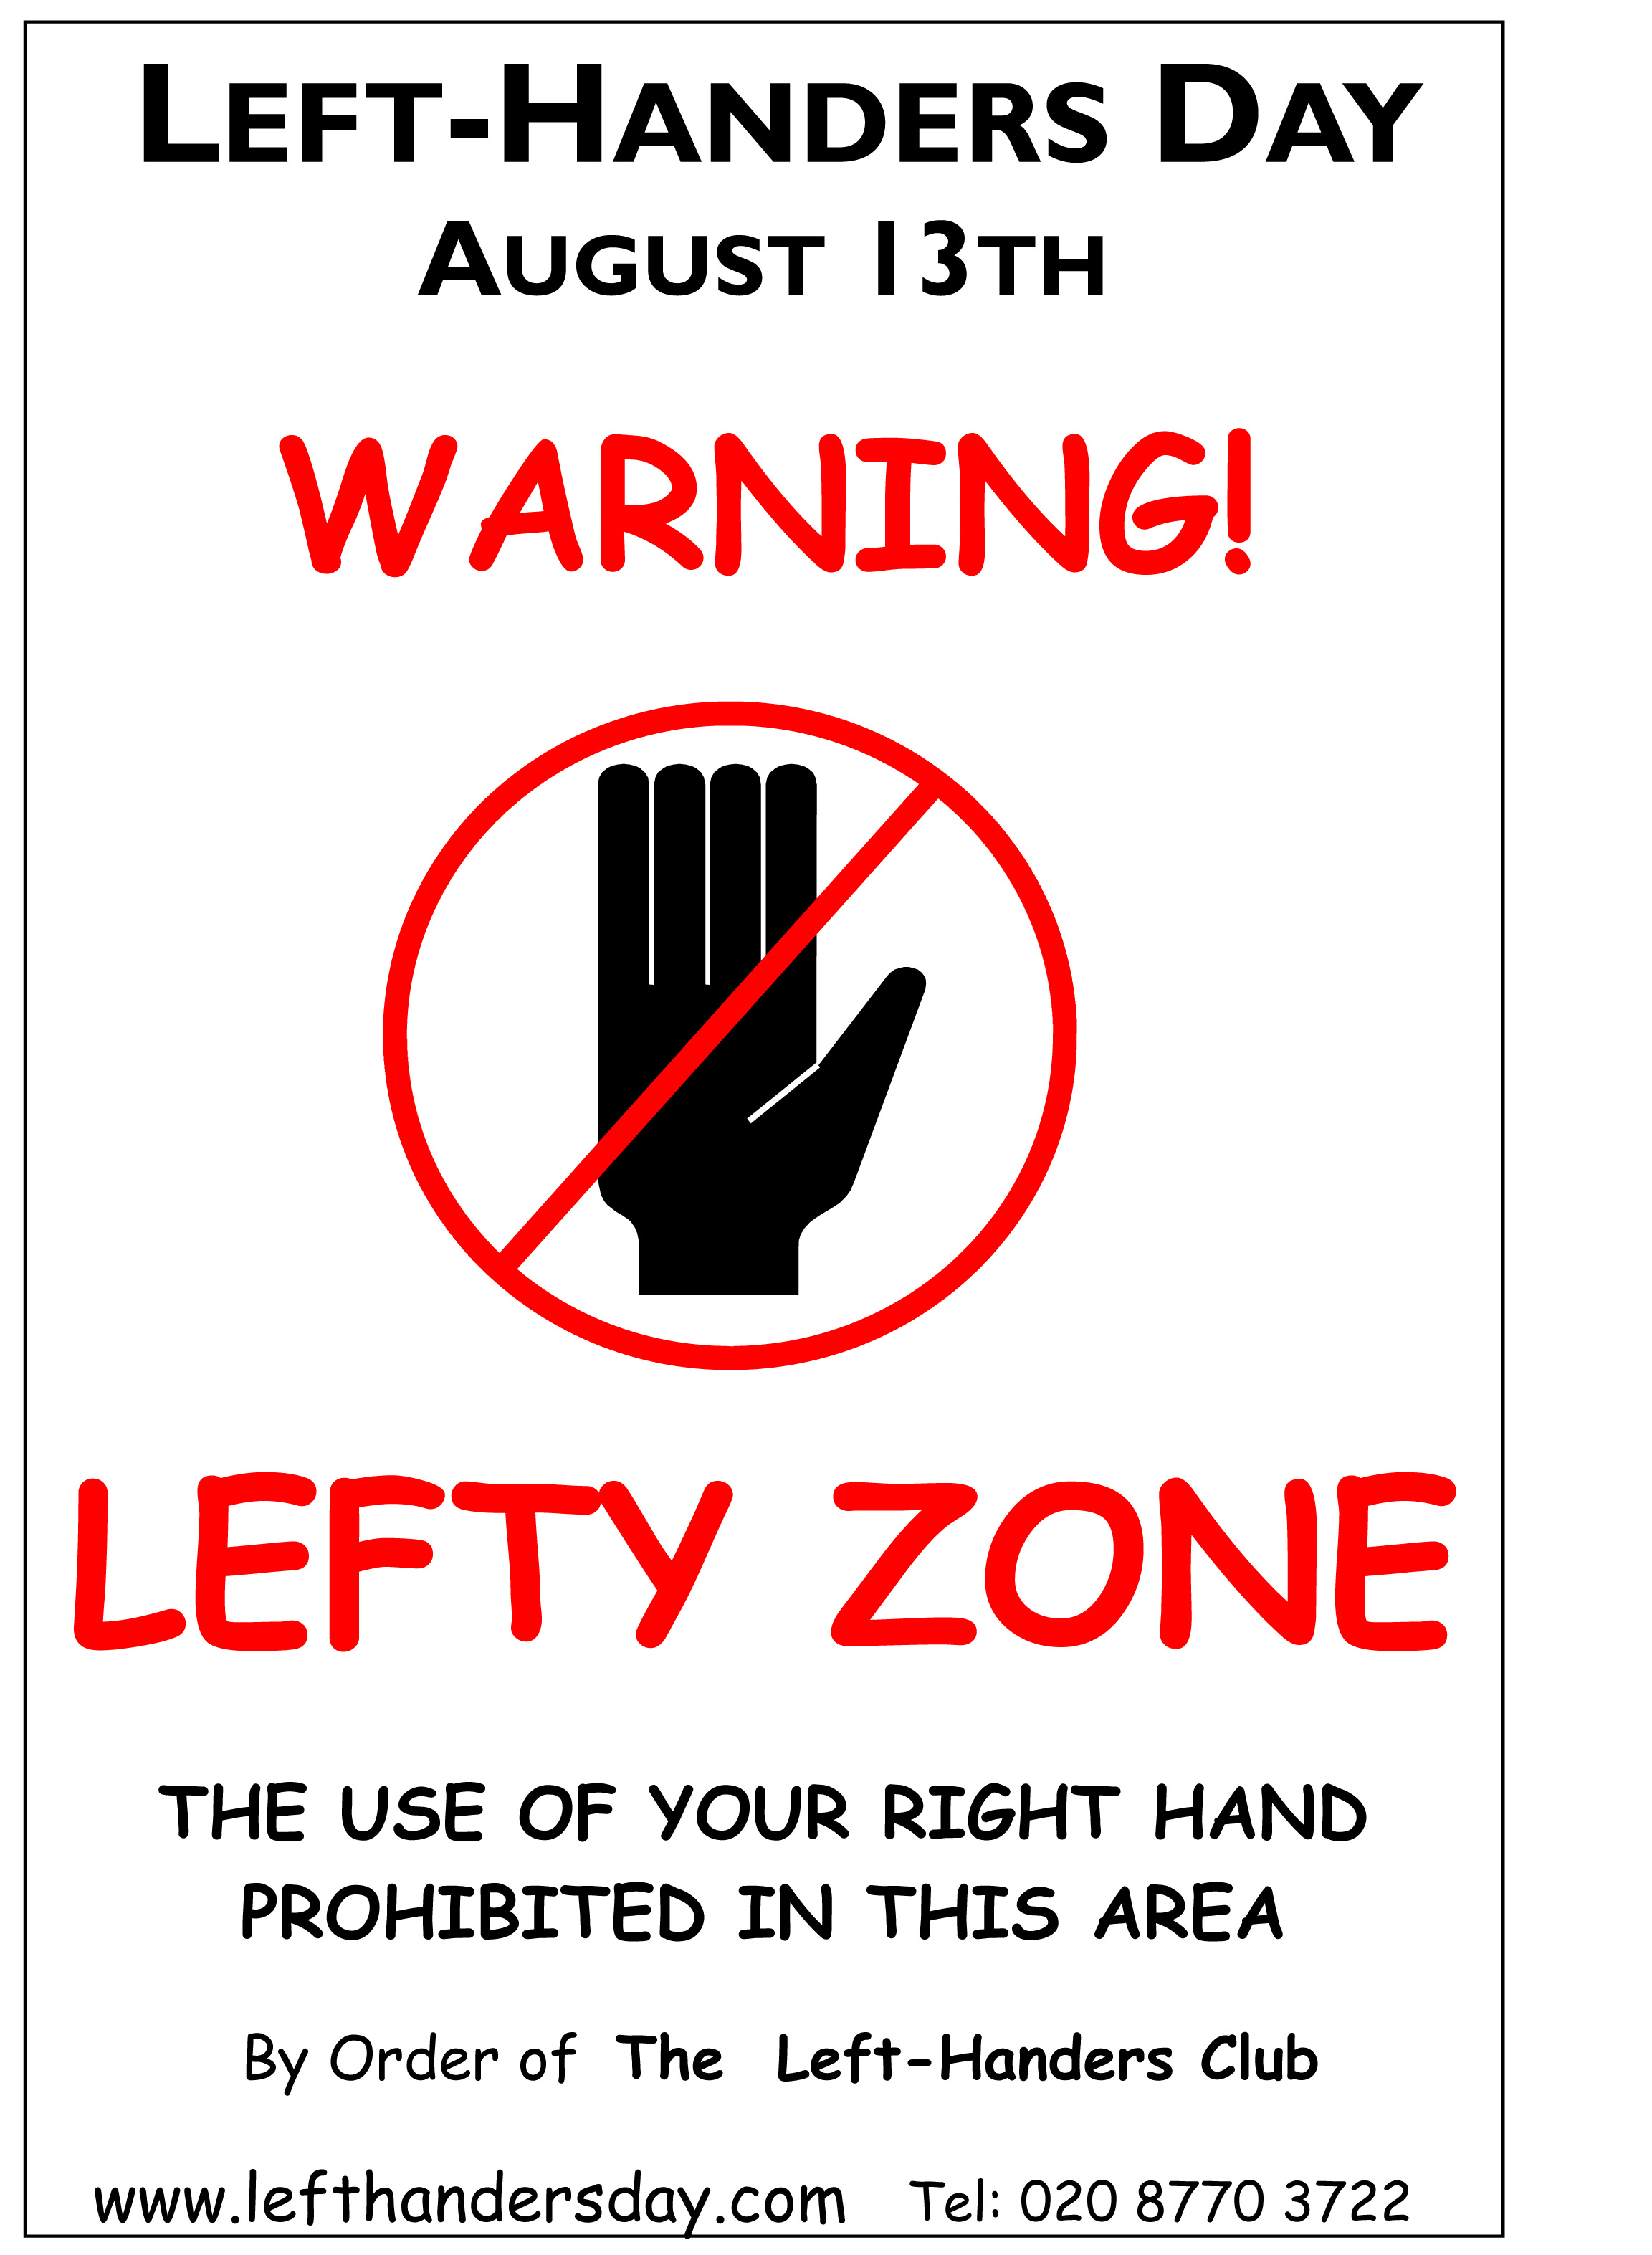 Left Handers Day August 13th Warning Lefty Zone